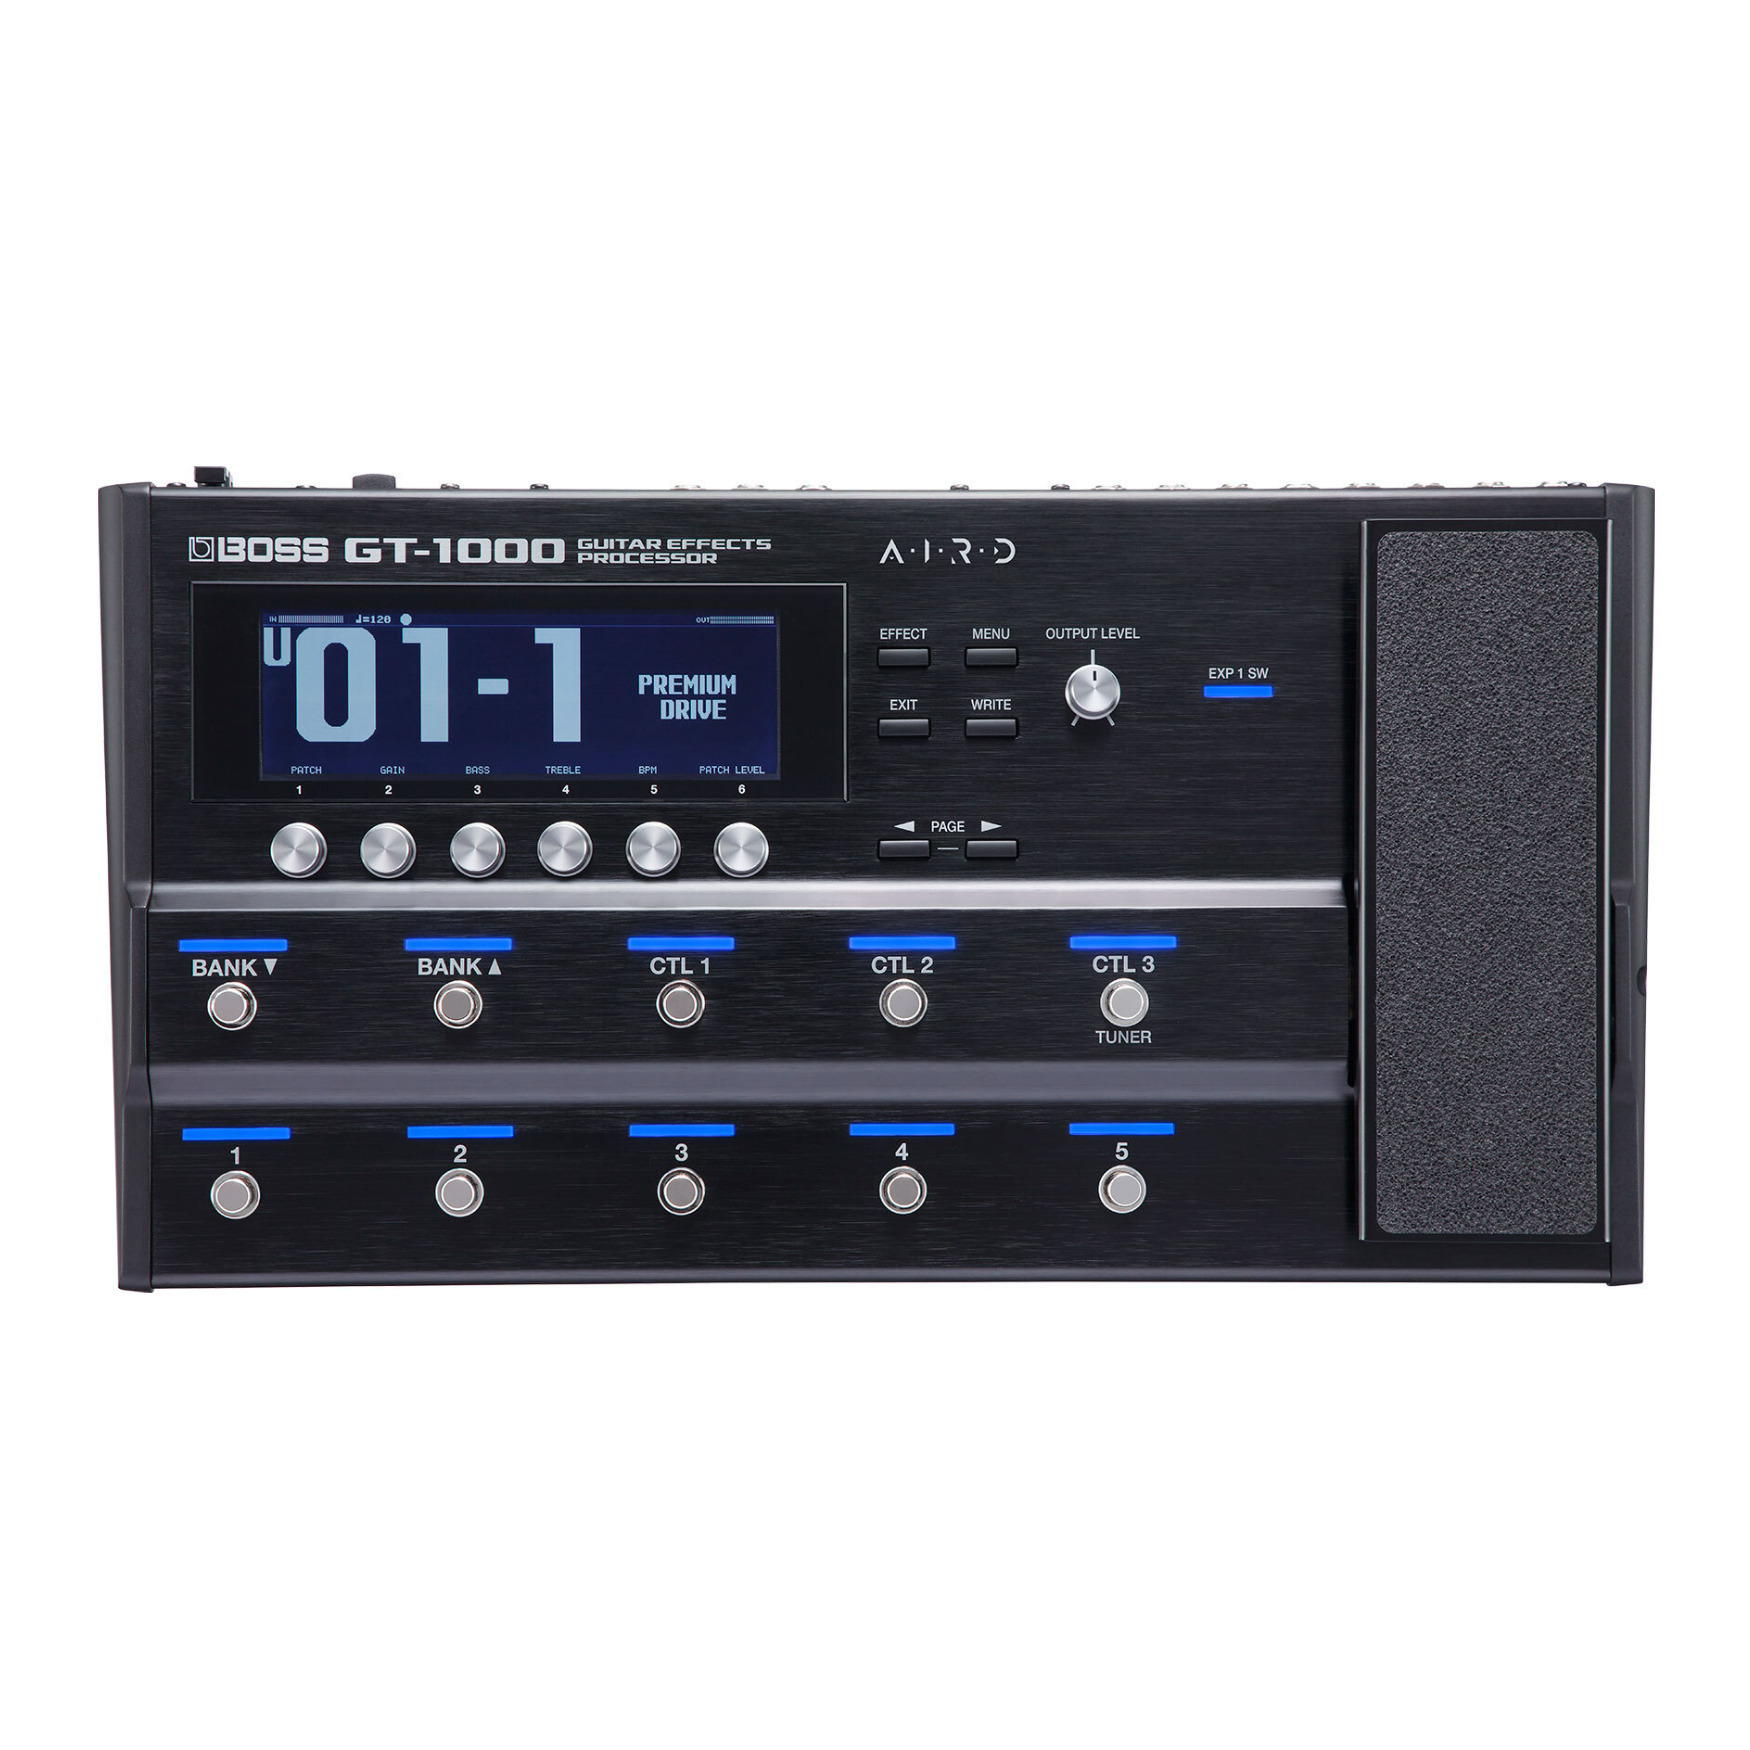 Guitar Multi-Effects Processor with Highly Musical Guitar Amplifiers in Black - Boss GT-1000